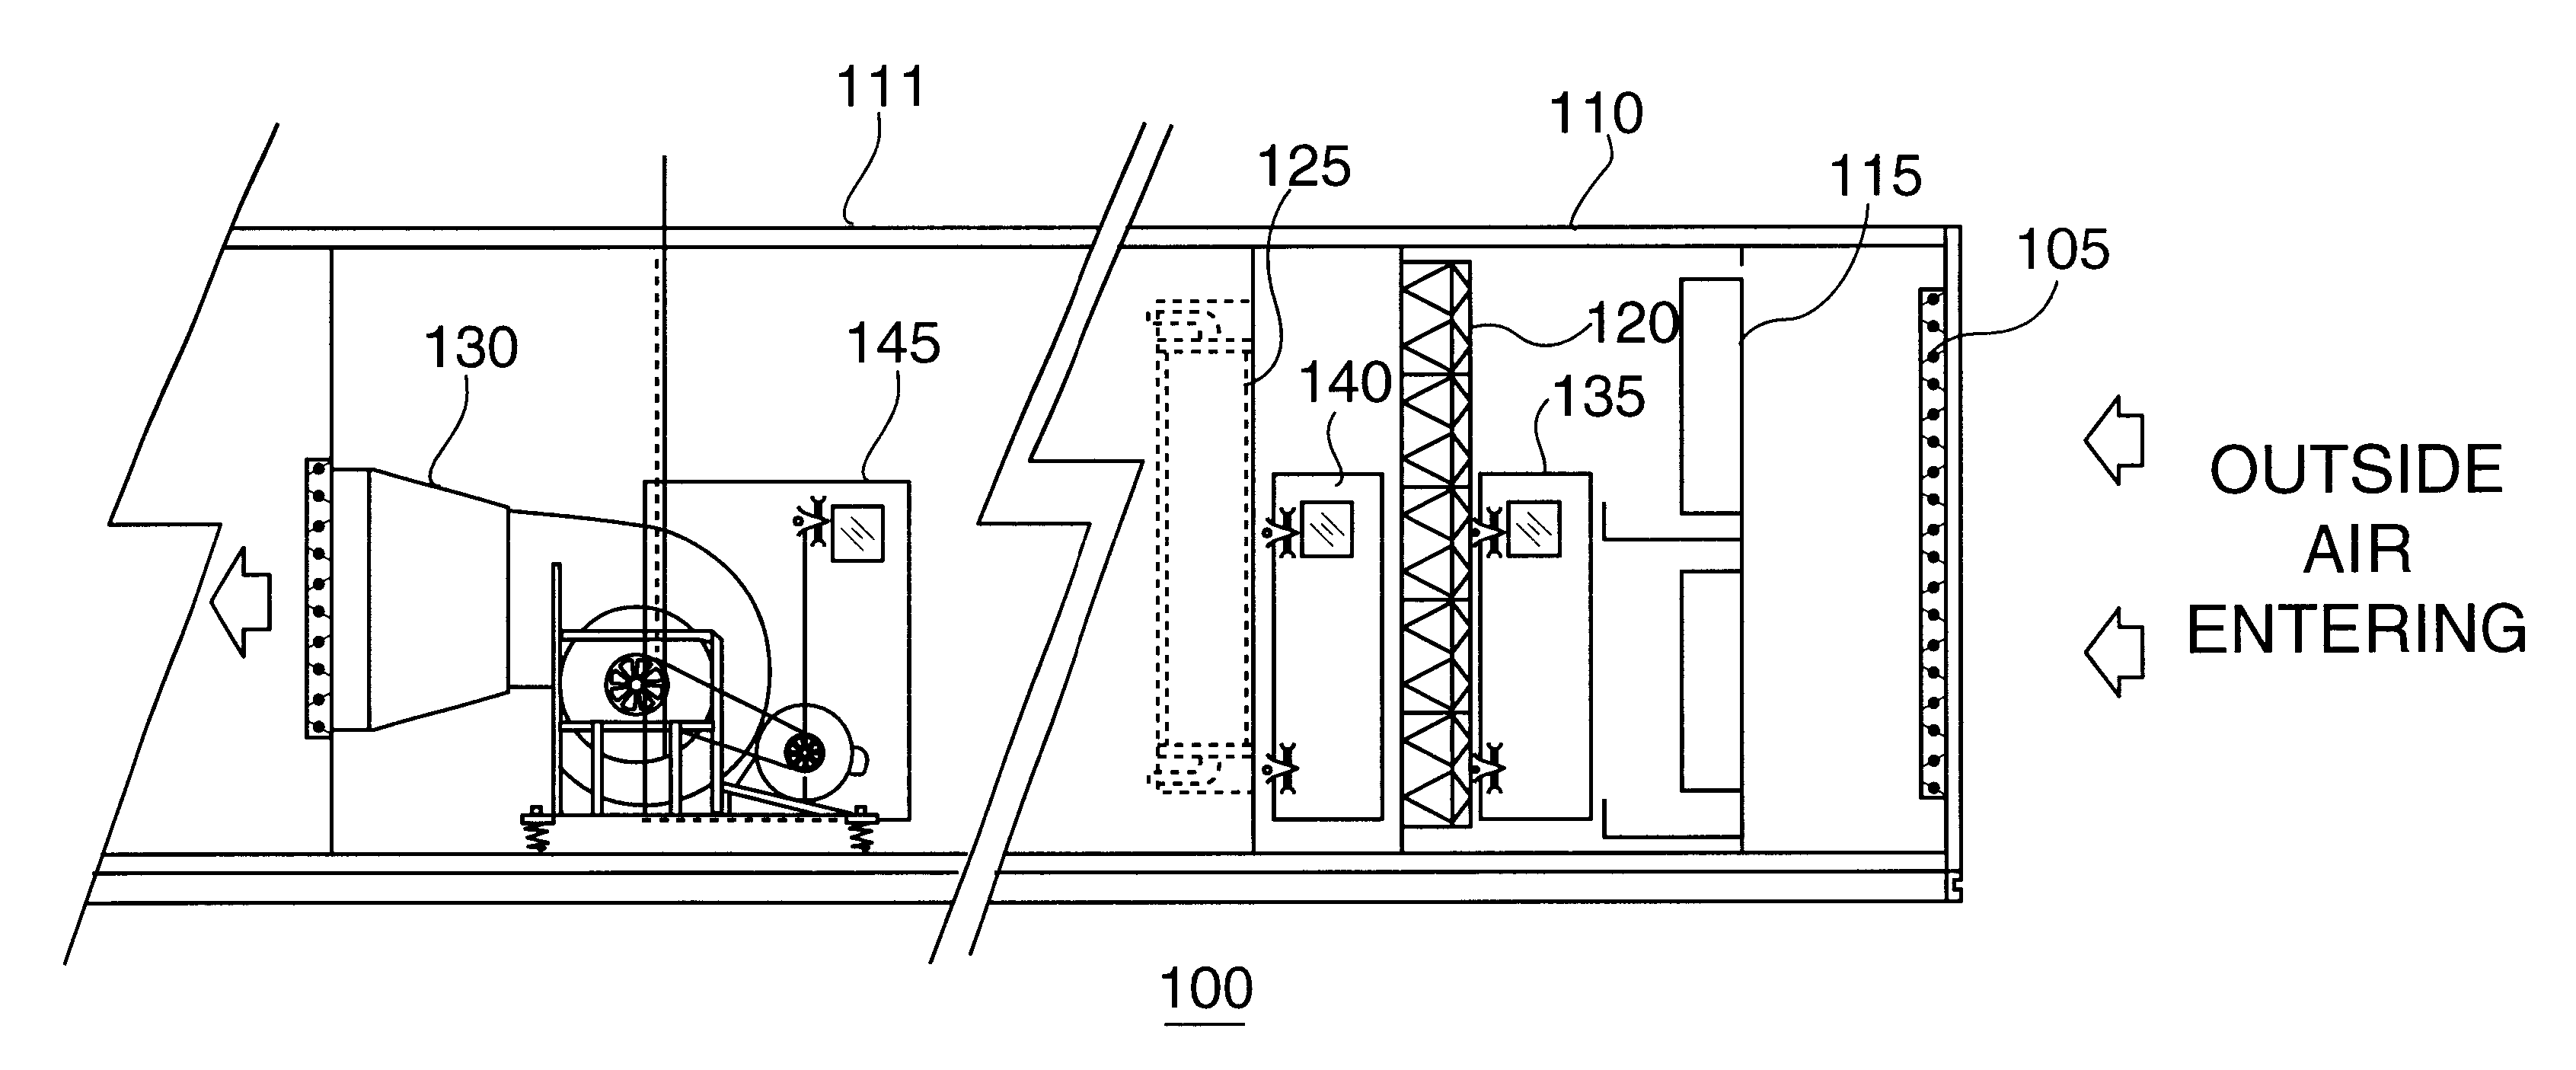 Snow extractor for use with an air handling system